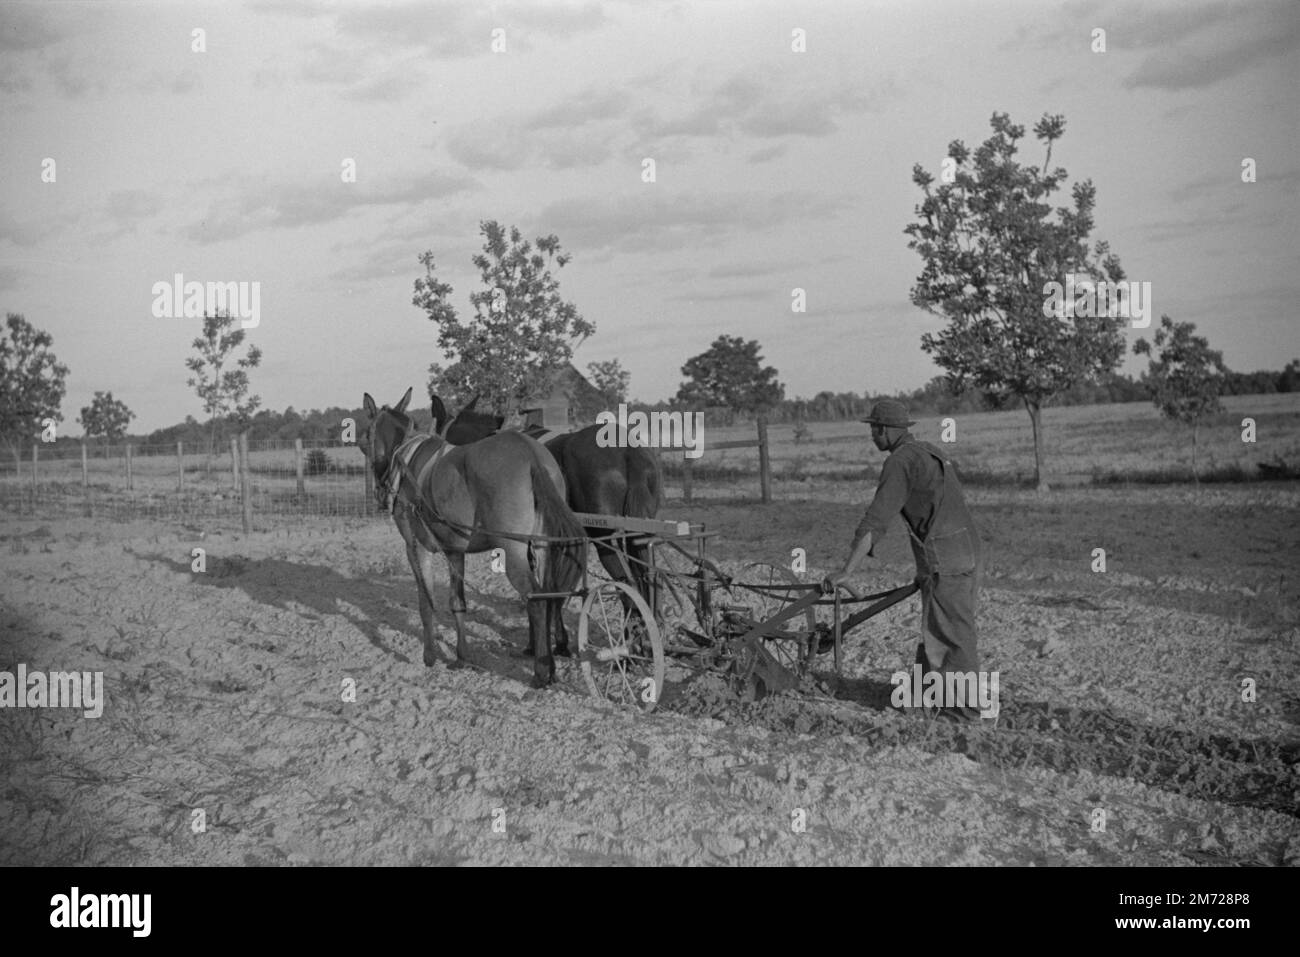 Team of mules and cultivator on one of project borrower's farms. Flint River Farms, Georgia. Man and livestock. Wolcott, Marion Post, photographer. Circa 1939 (LOC) Stock Photo